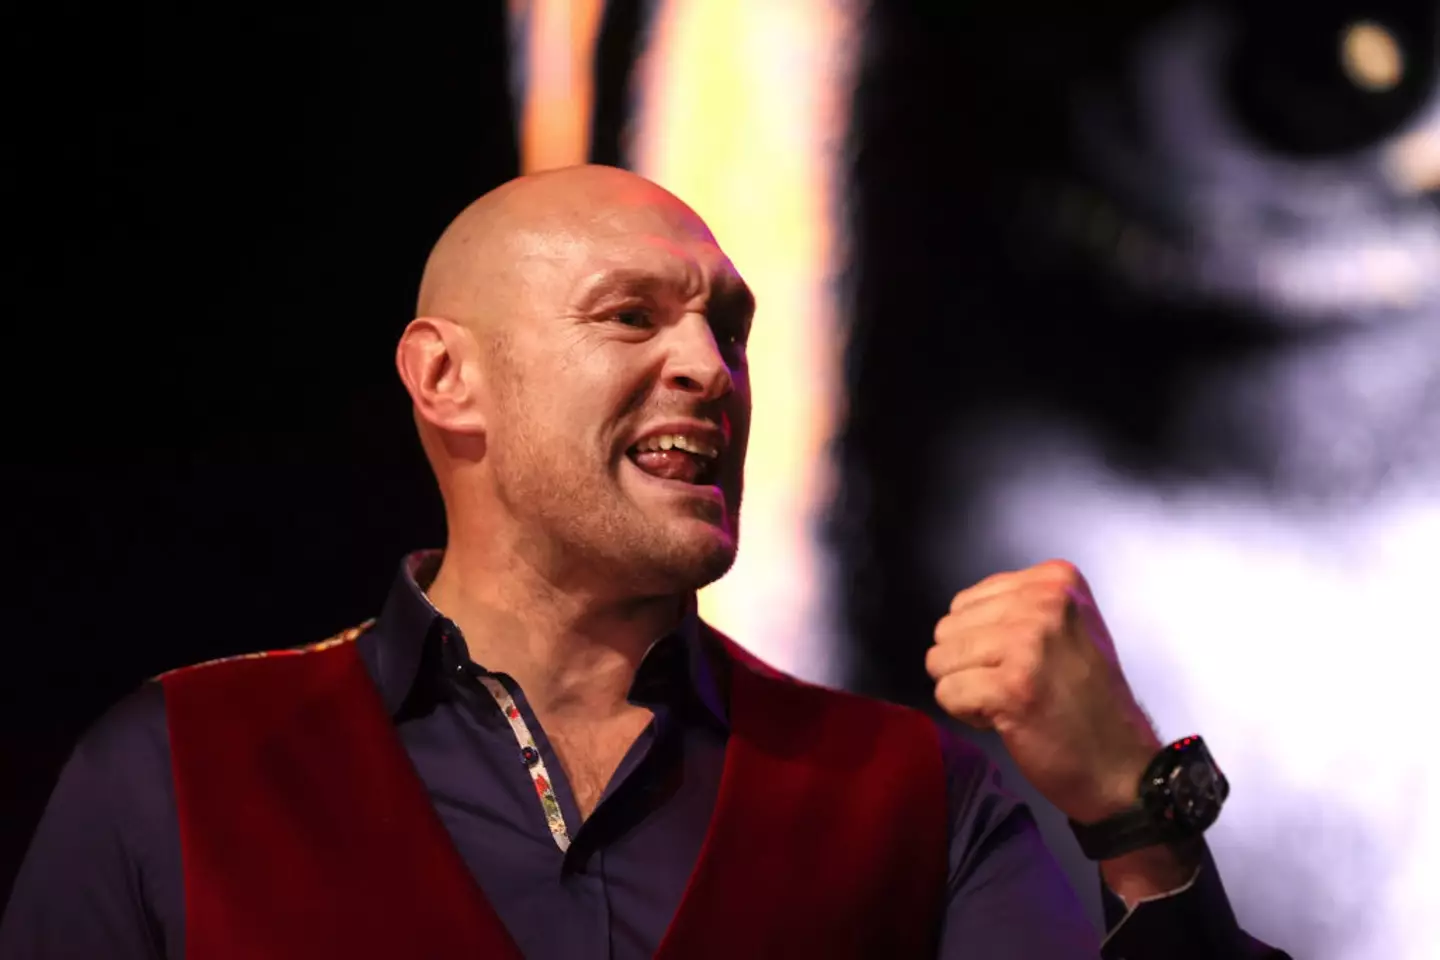 Fury has become one of the greatest heavyweight boxers of his generation.